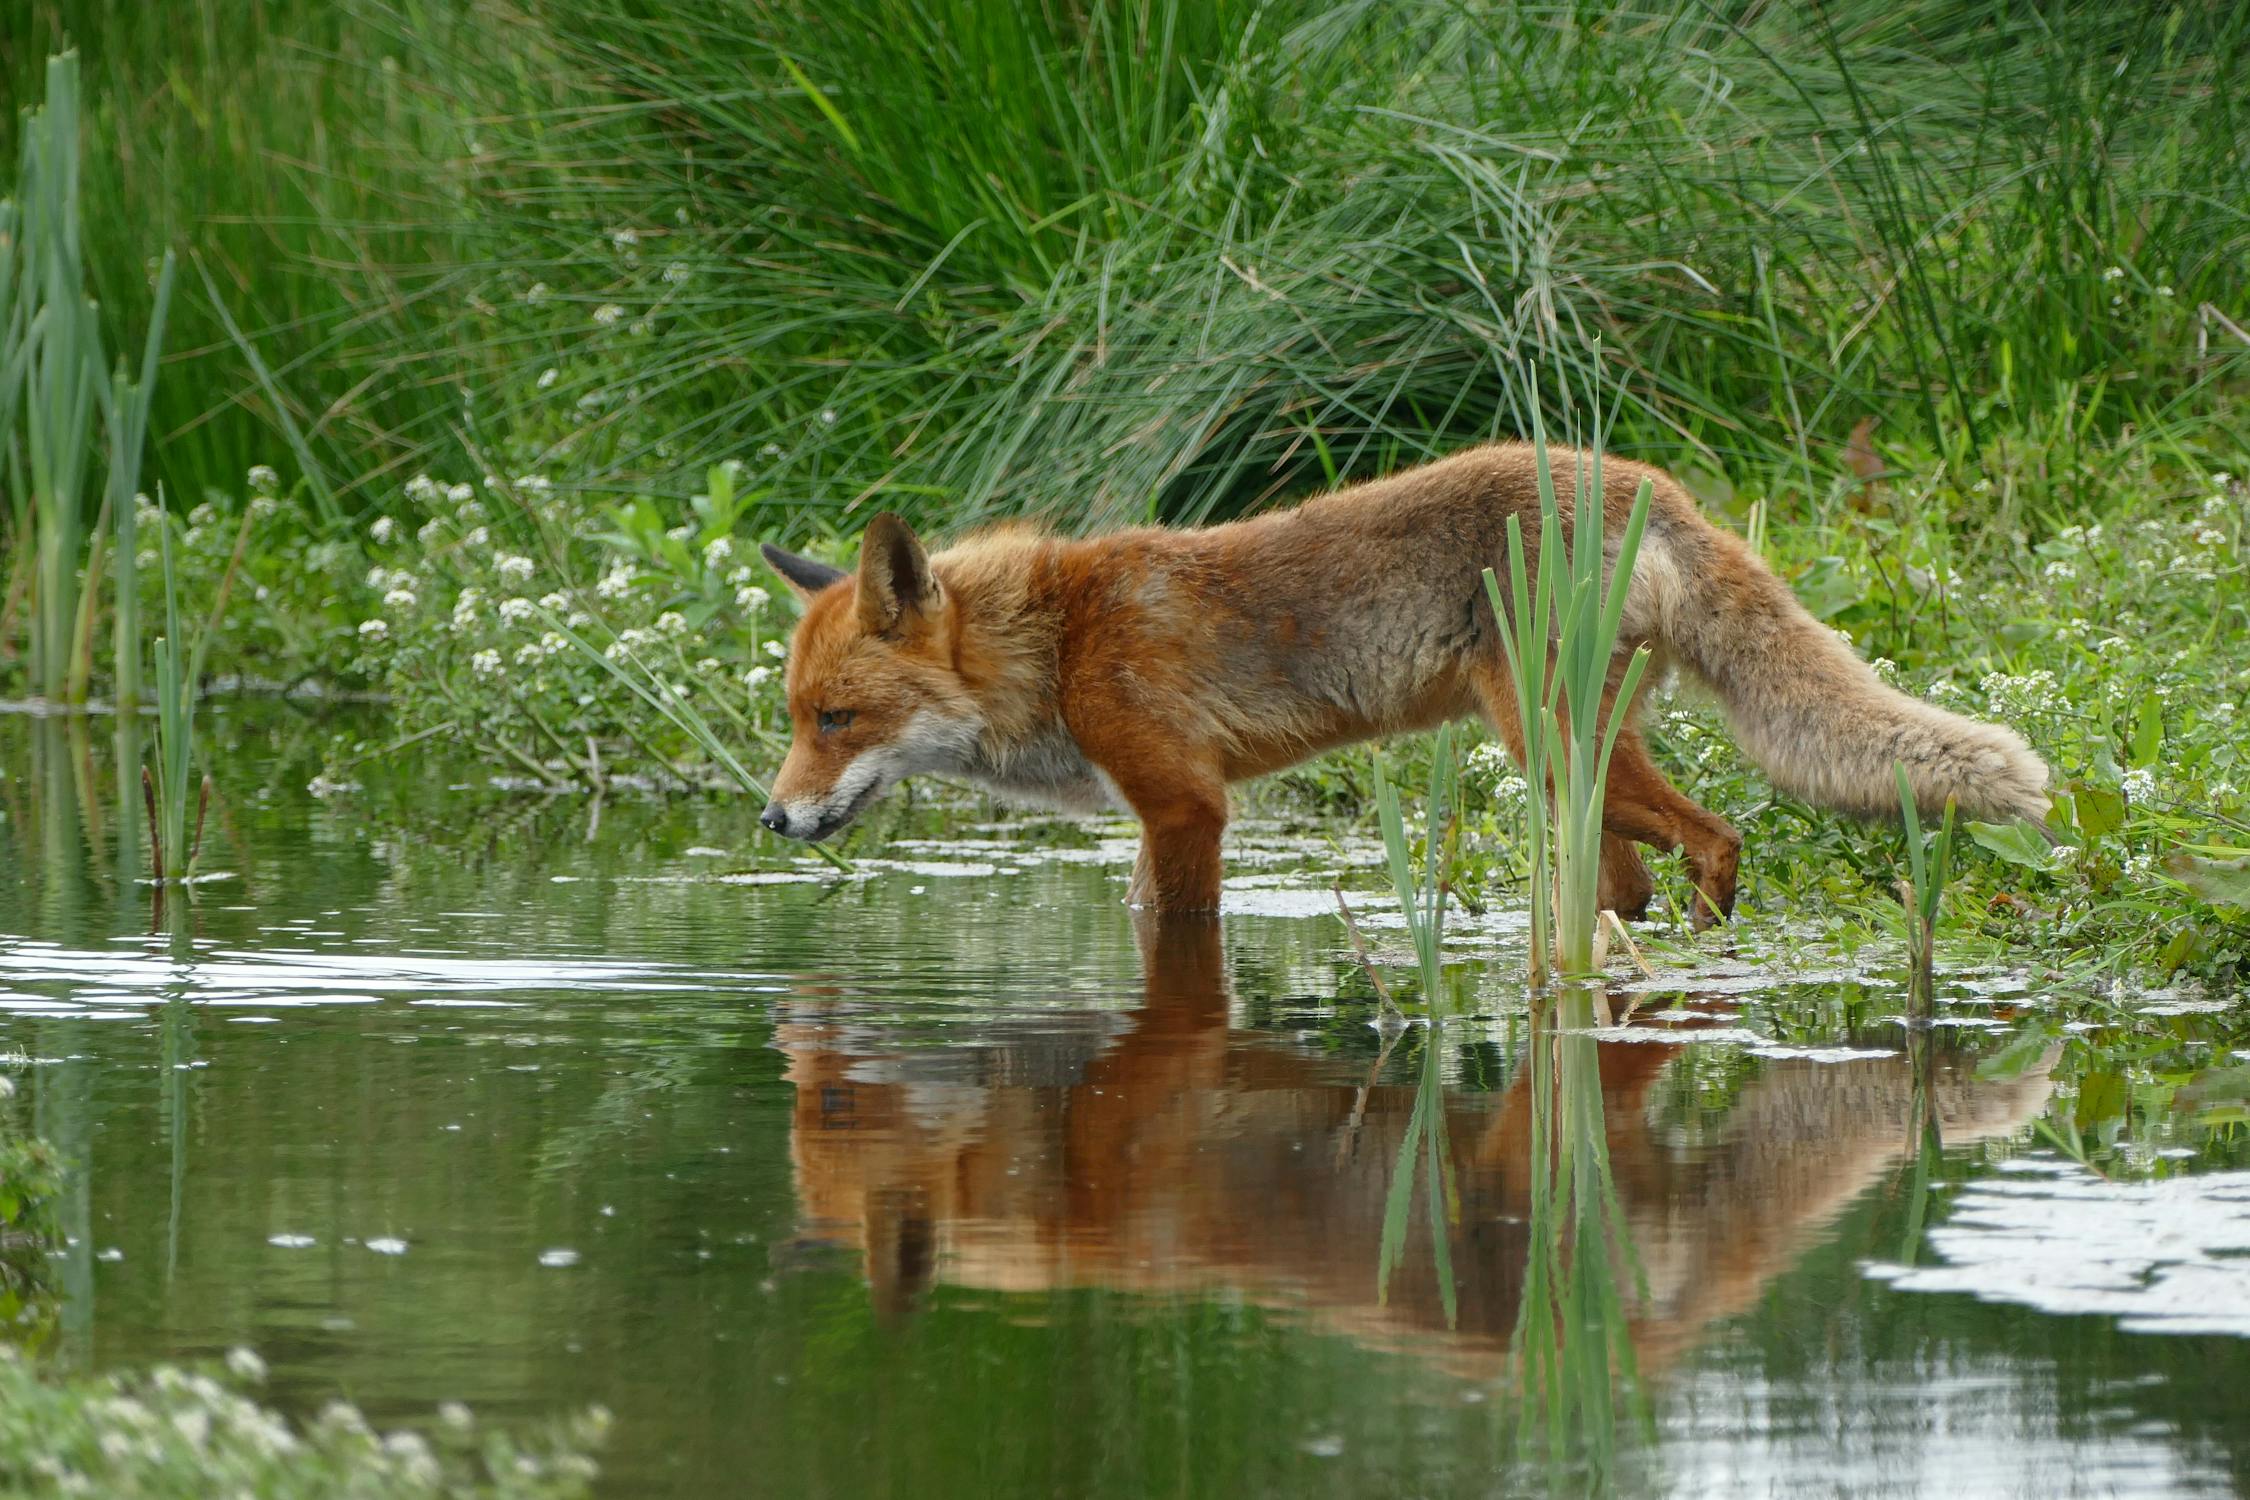 Fox Photo by Pixabay from Pexels: https://www.pexels.com/photo/tan-and-orange-fox-standing-in-water-near-the-grass-158399/